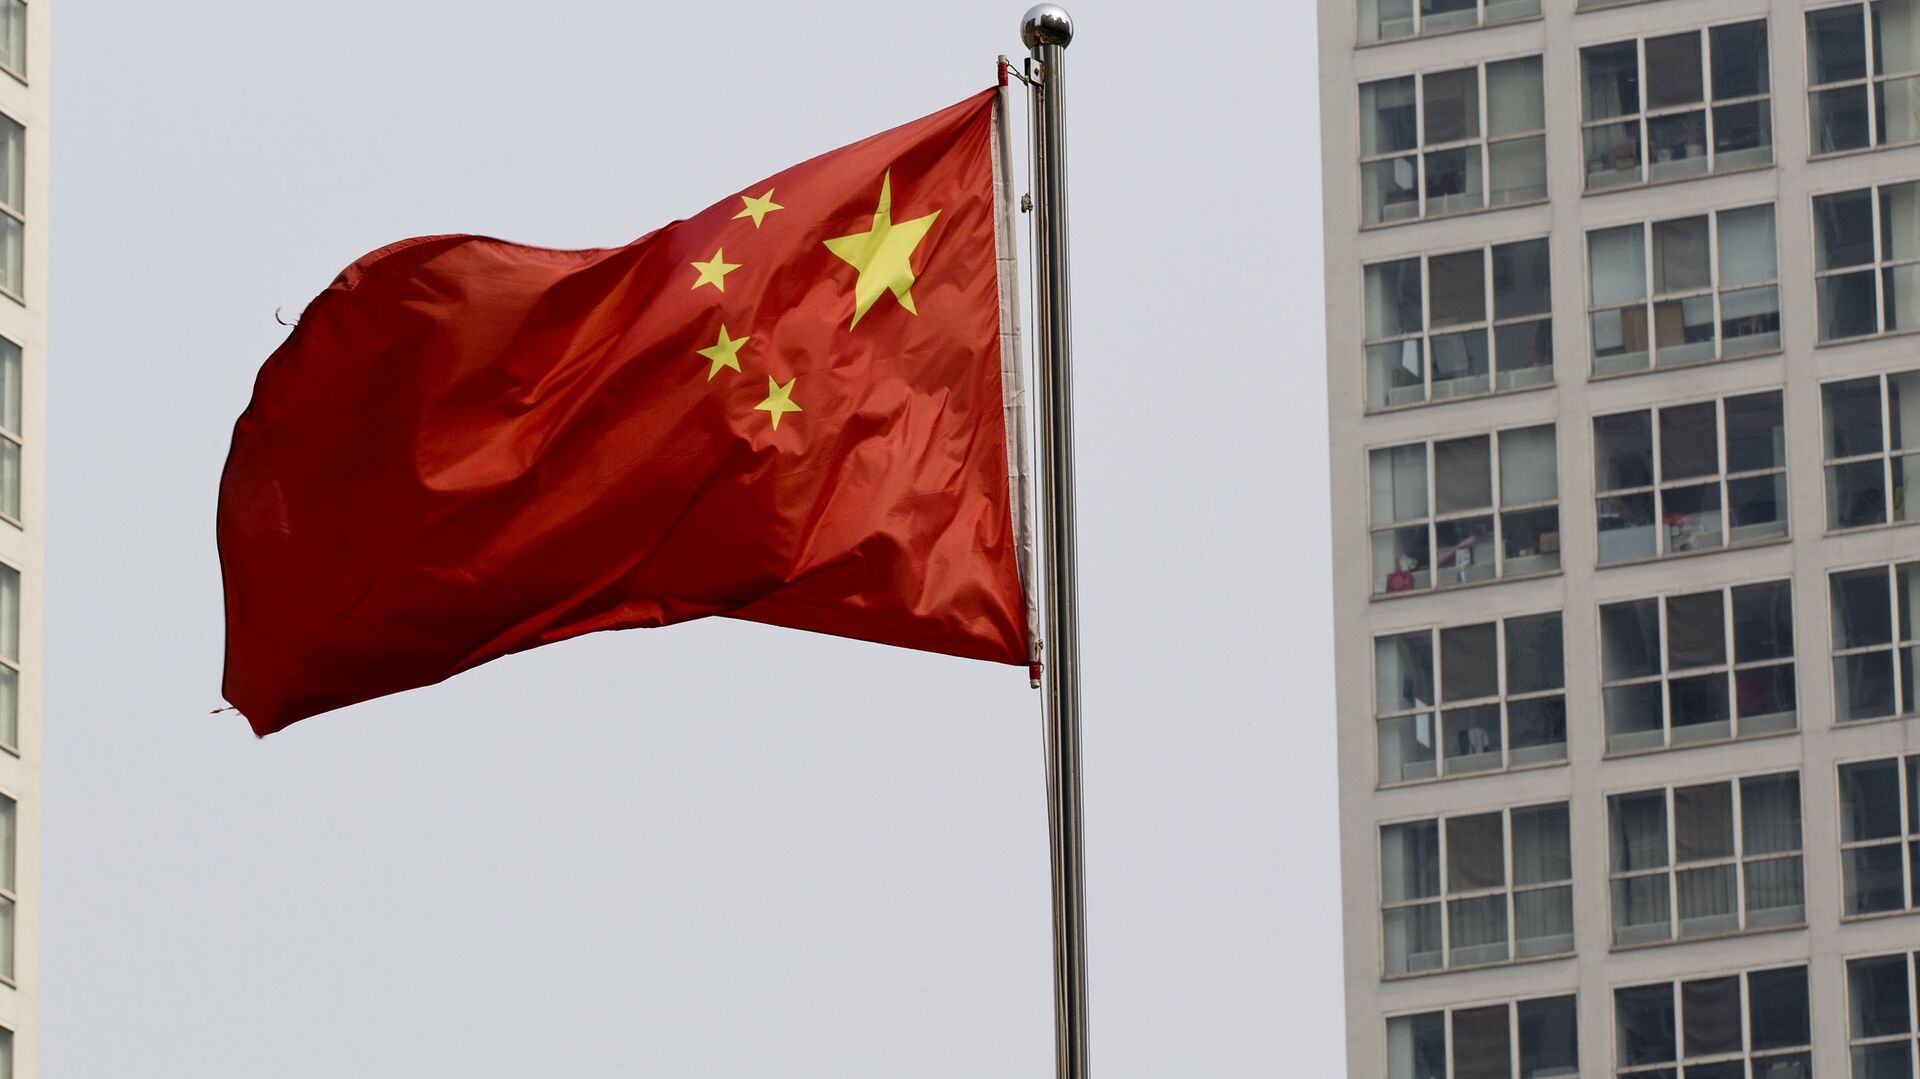 A Chinese national flag flutters in the wind in between a high-rise residential and office complex in Beijing, China. (File) - Sputnik Moldova-România, 1920, 07.03.2022